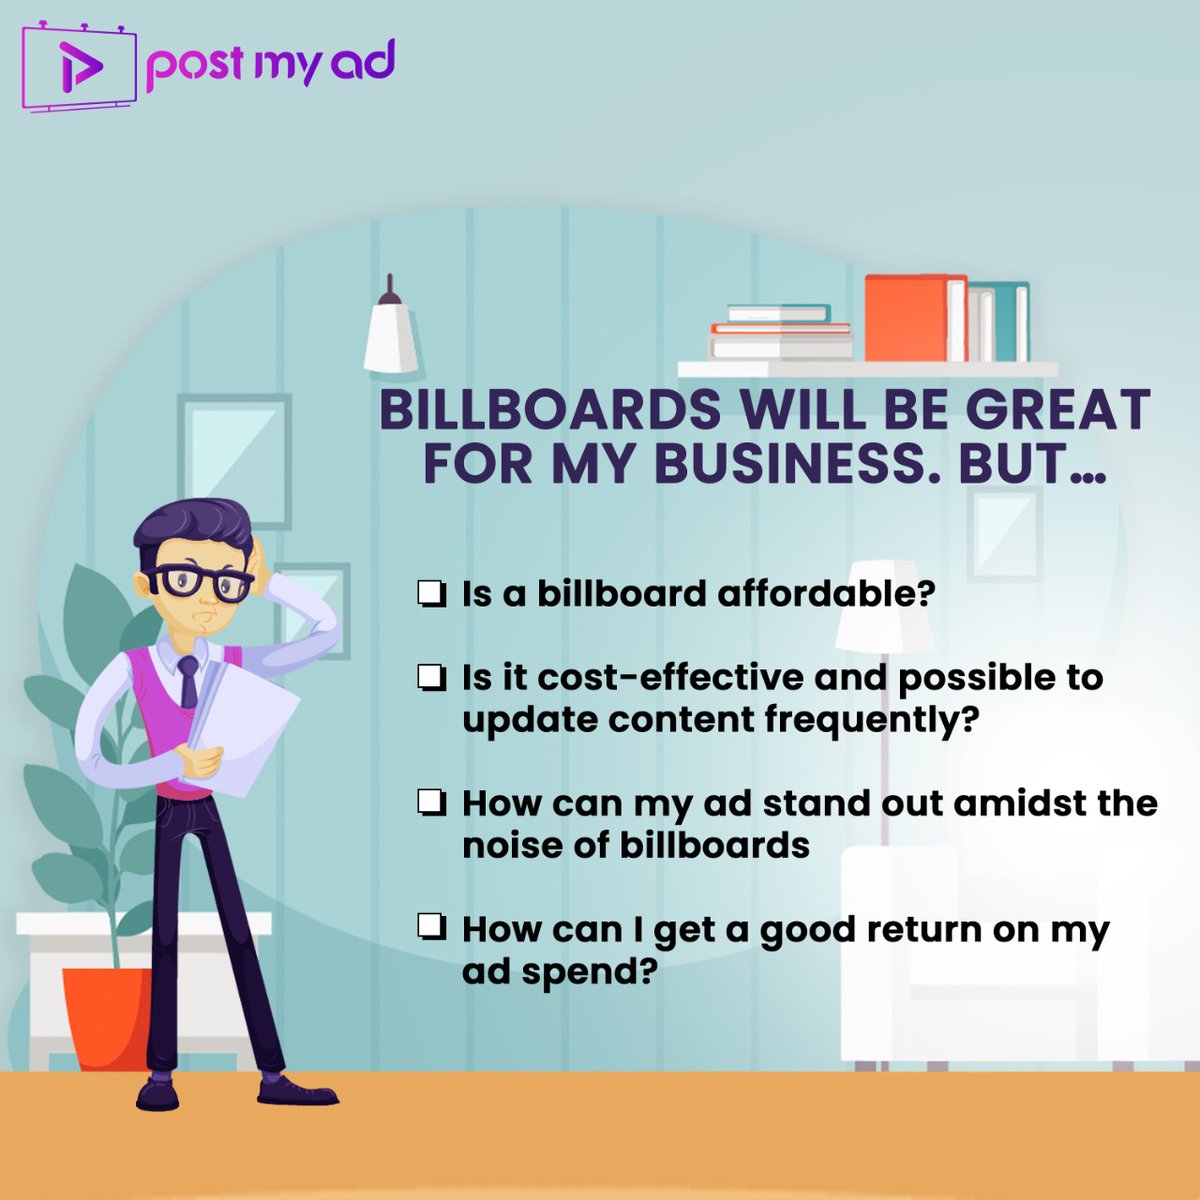 Did these questions arise for you when you considered your advertising options?
.
.
.
.
.
#postmyad #pma #advertising #marketing #branding #brand #digitalbillboard #billboard #affordable #doubts #questions #costing #content #returns #details #important #abundant #regular